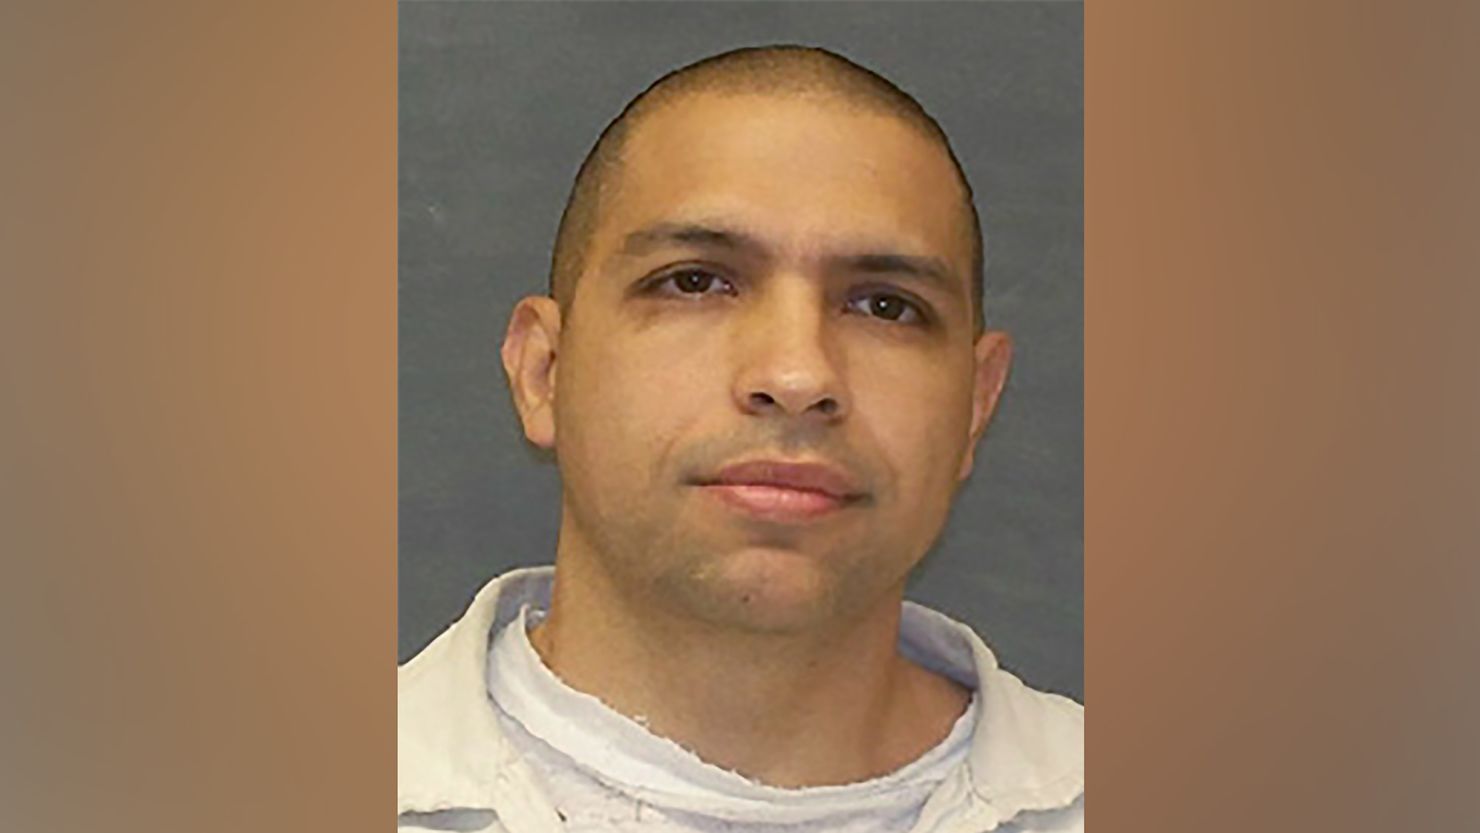 The Texas Department of Criminal Justice says Gonzalo Lopez has ties to the Mexican mafia.